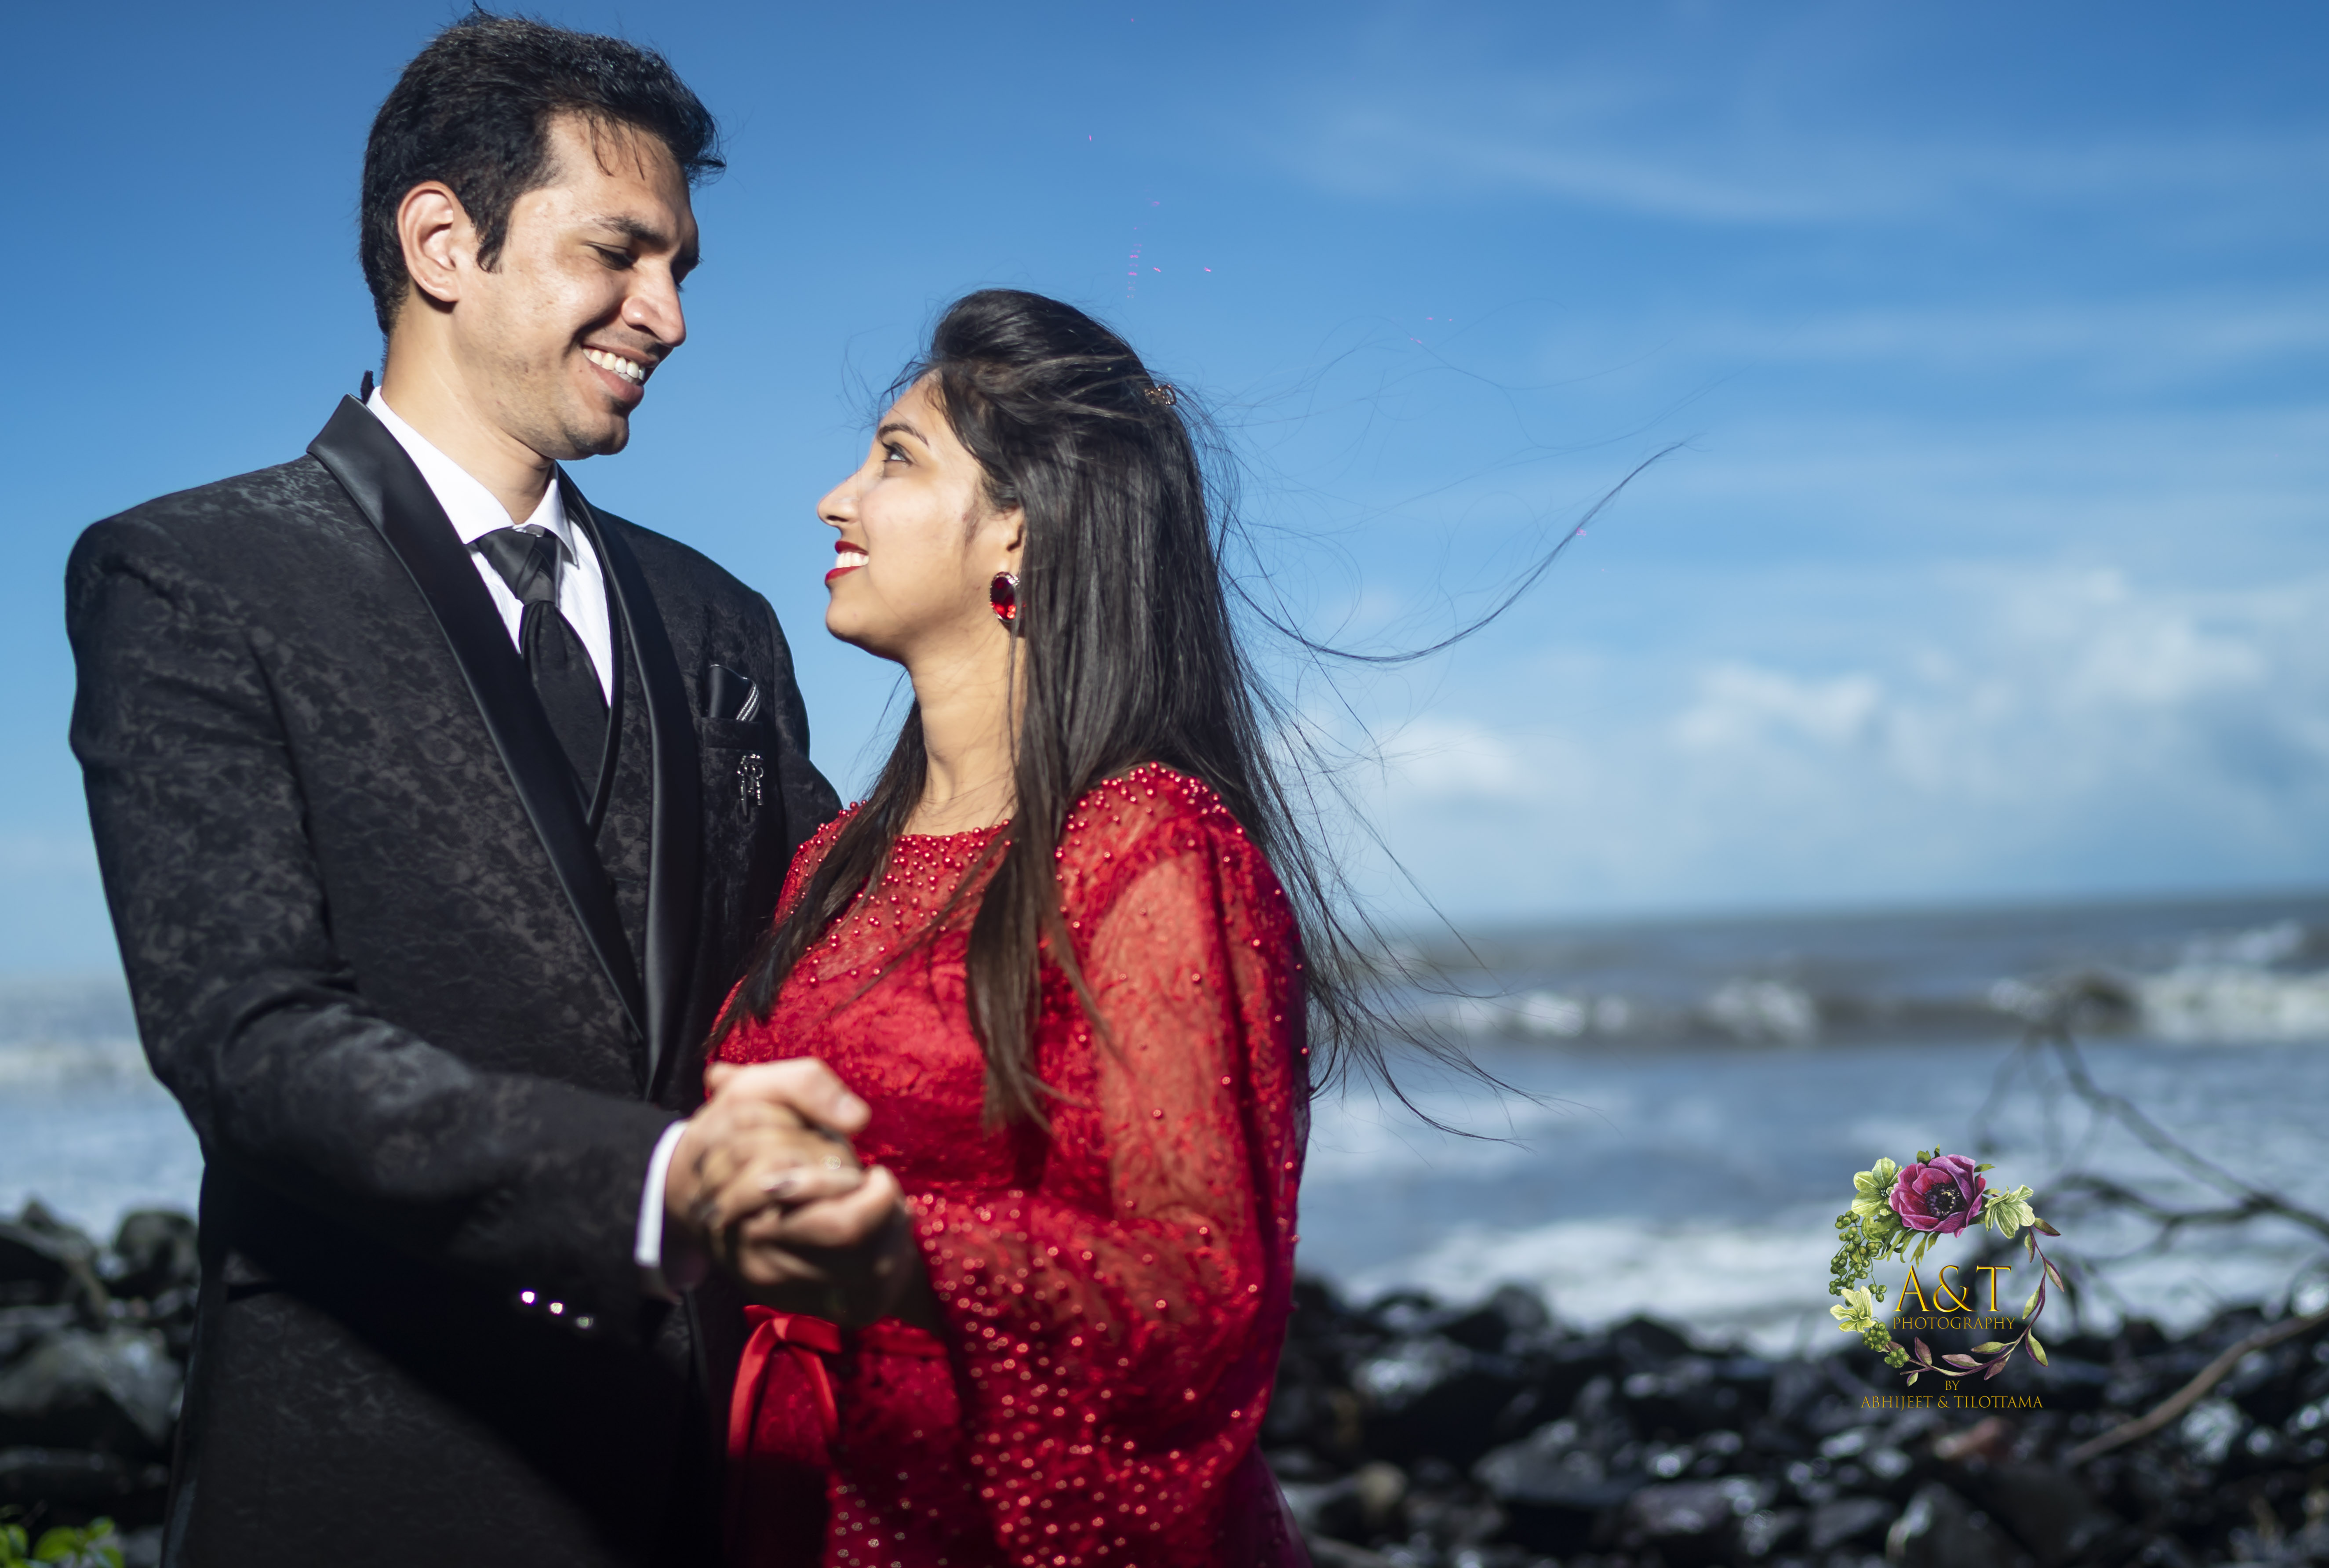 Anil & Priyanka were enjoying each other's company at their Adorable Pre-Wedding Photoshoot at the Sea-shore of Alibaug, Pune.